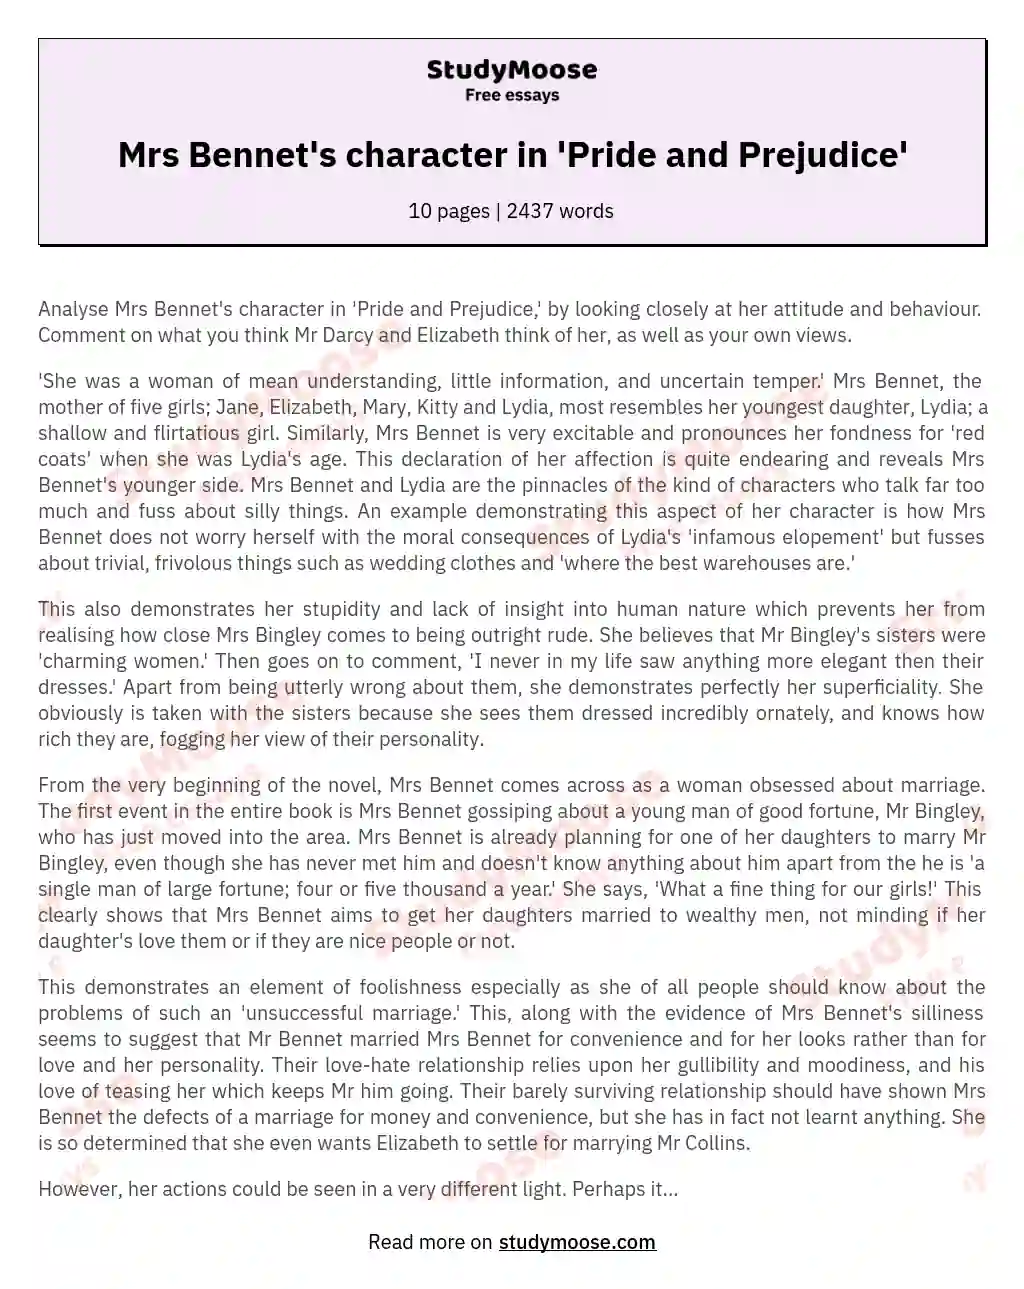 Mrs Bennet's character in 'Pride and Prejudice' essay